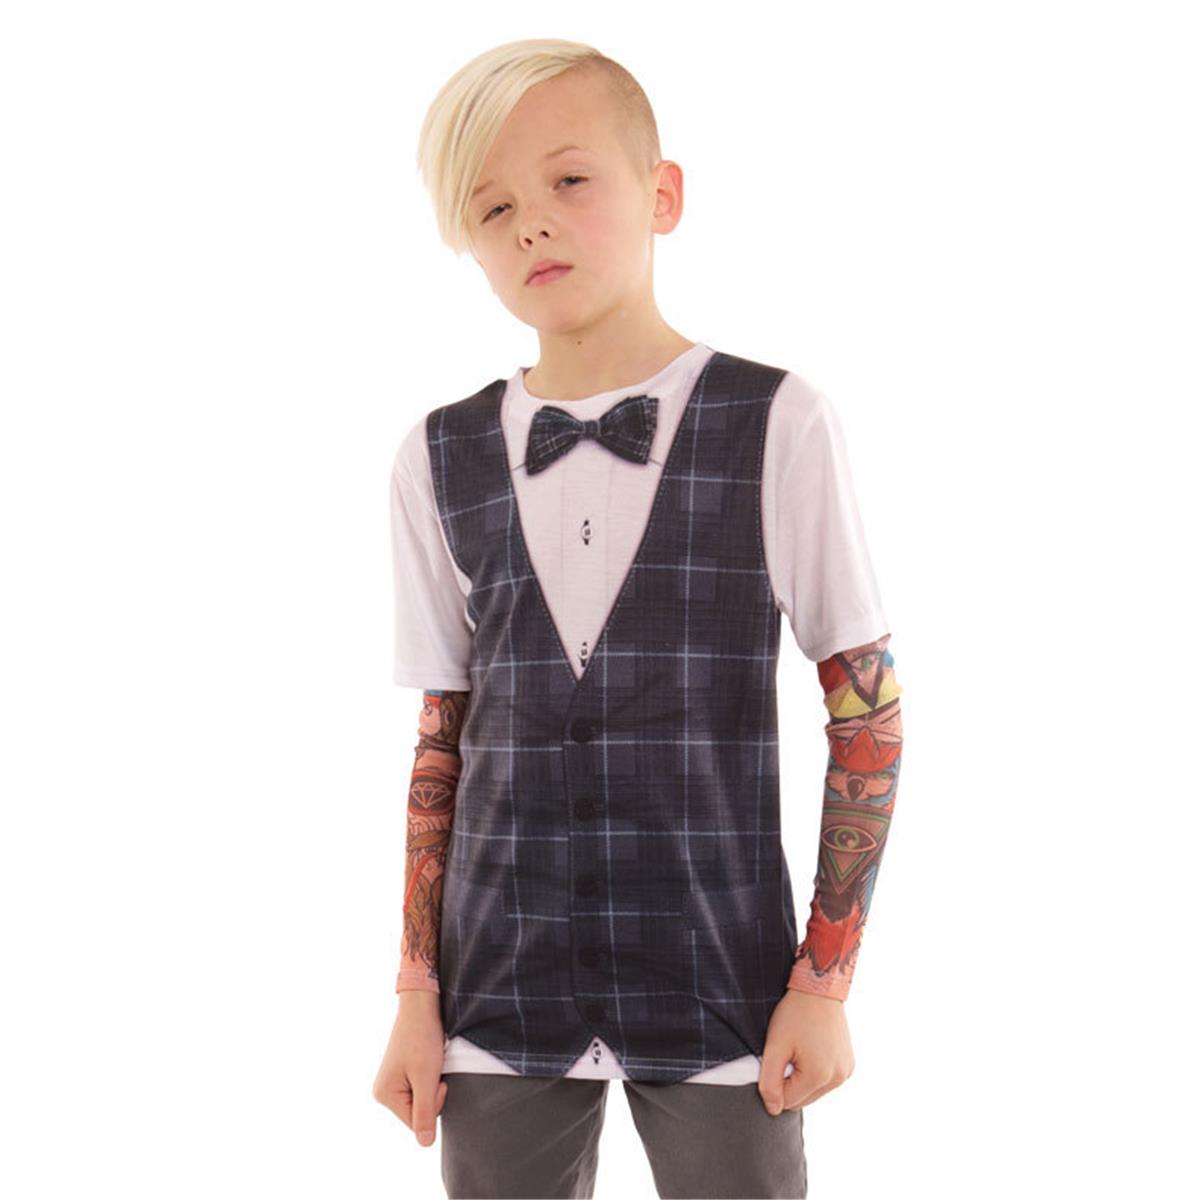 F134199-l Youth Hipster Vest With Tattoo, Black - Large